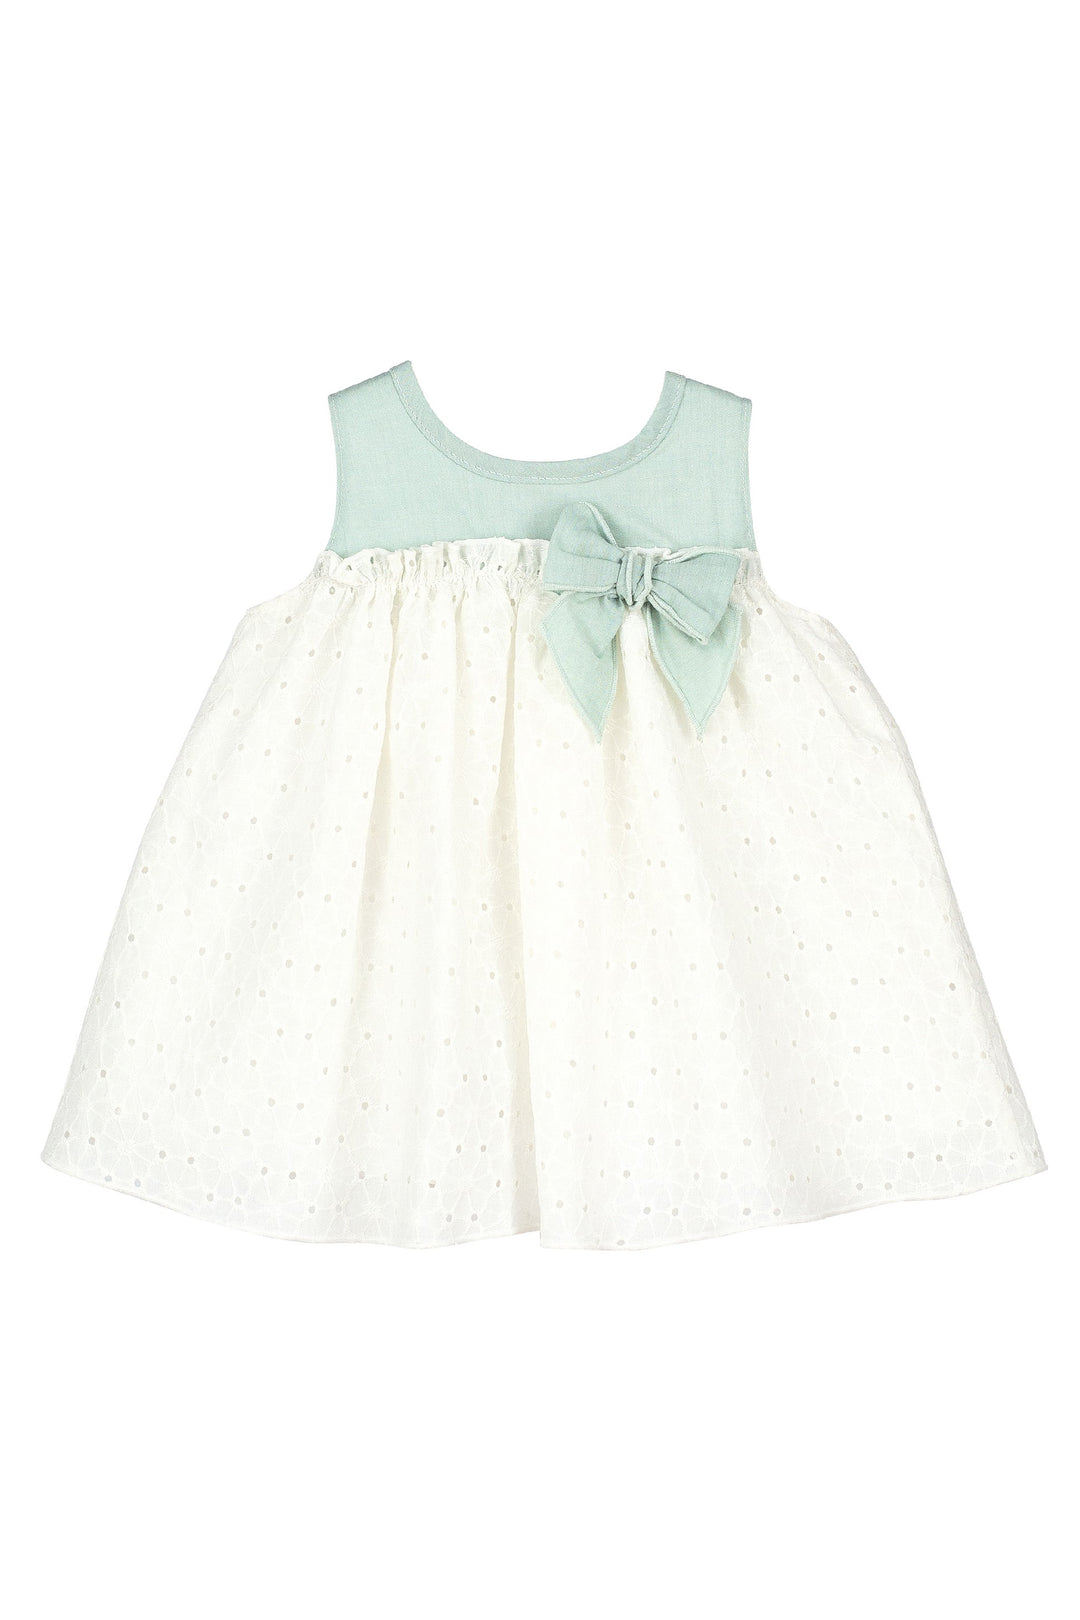 Calamaro Excellentt "Kitty" Mint Broderie Anglaise Dress | Millie and John